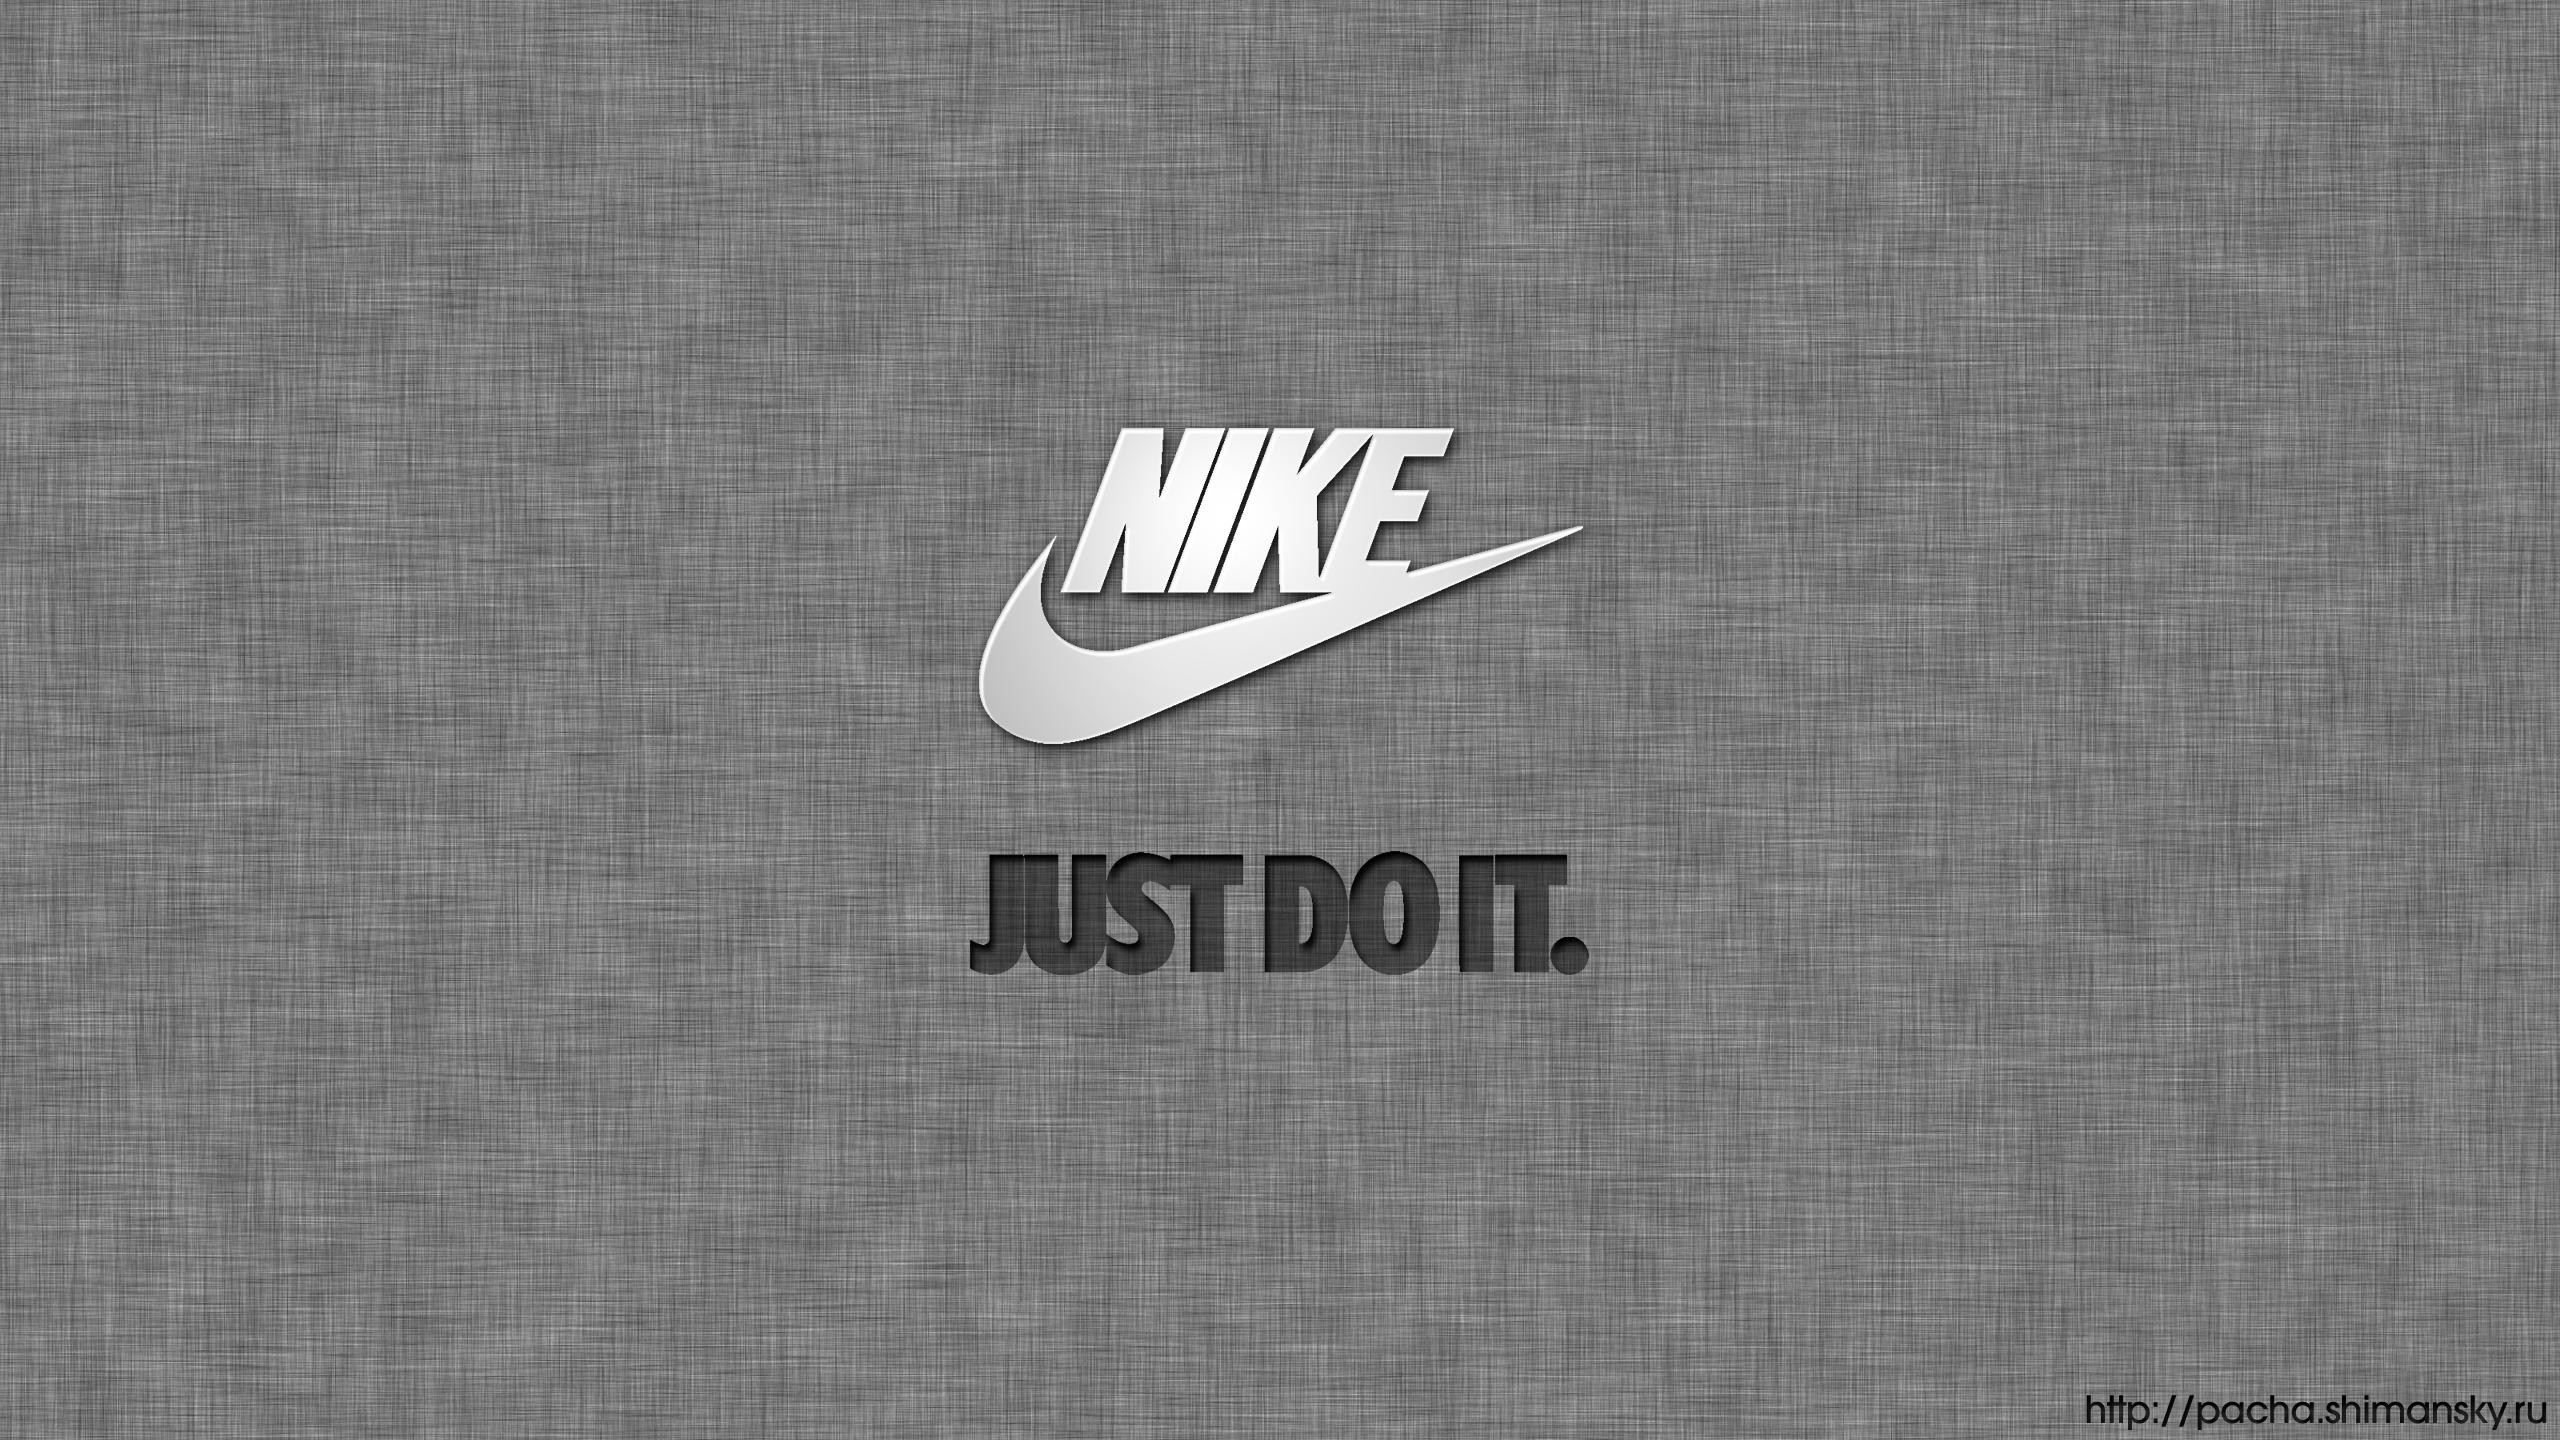 nike wallpaper just do it 67 pictures nike wallpaper just do it 67 pictures